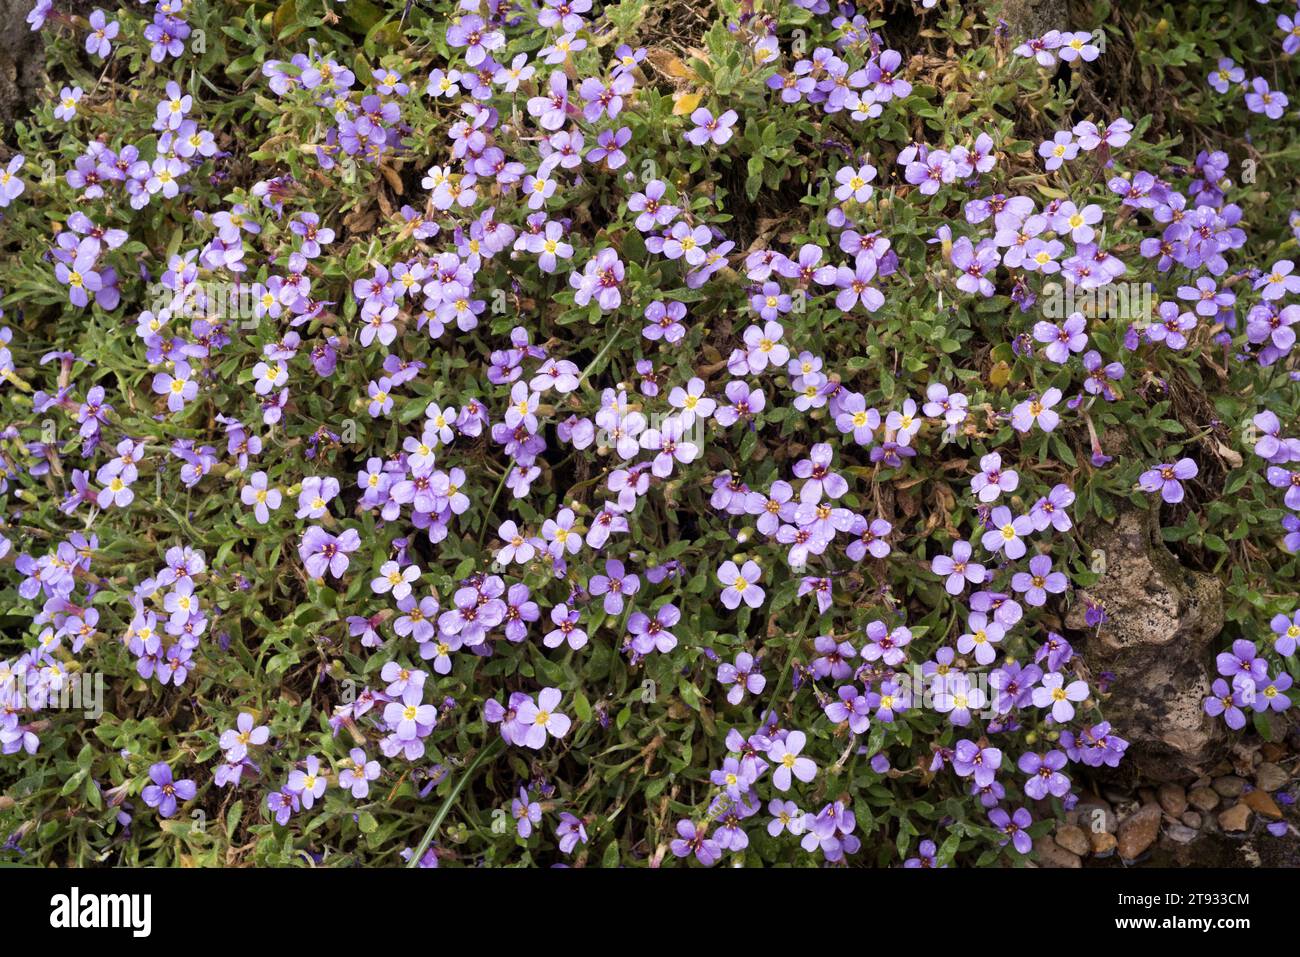 Aubrieta gracilis is a perennial and ornamental plant native to central Asia. Stock Photo